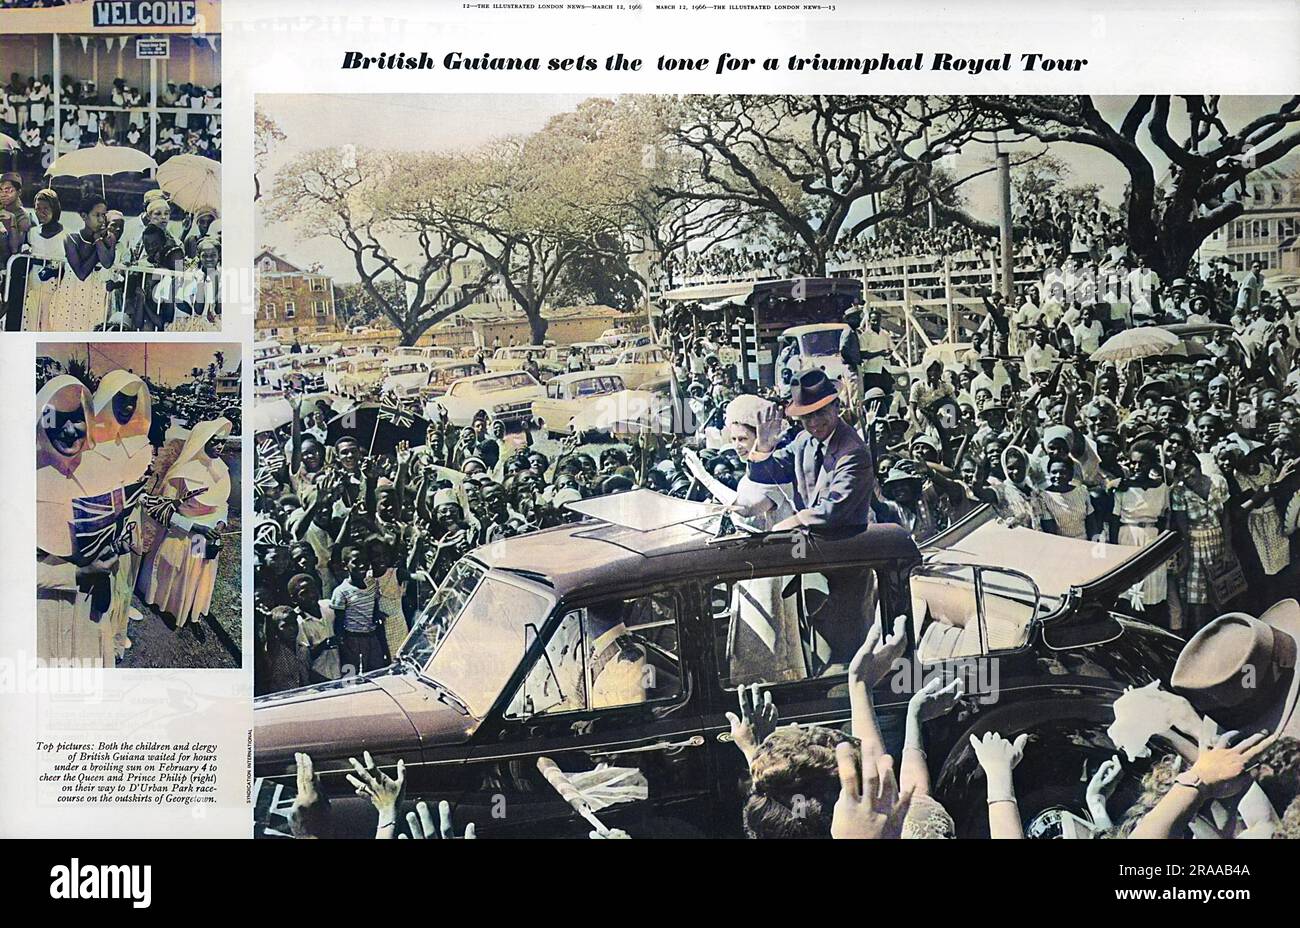 The Queen and Prince Philip wave to the crowds from their open-top car as they travel through British Guiana on their Royal Tour.     Date: 12th March 1966 Stock Photo